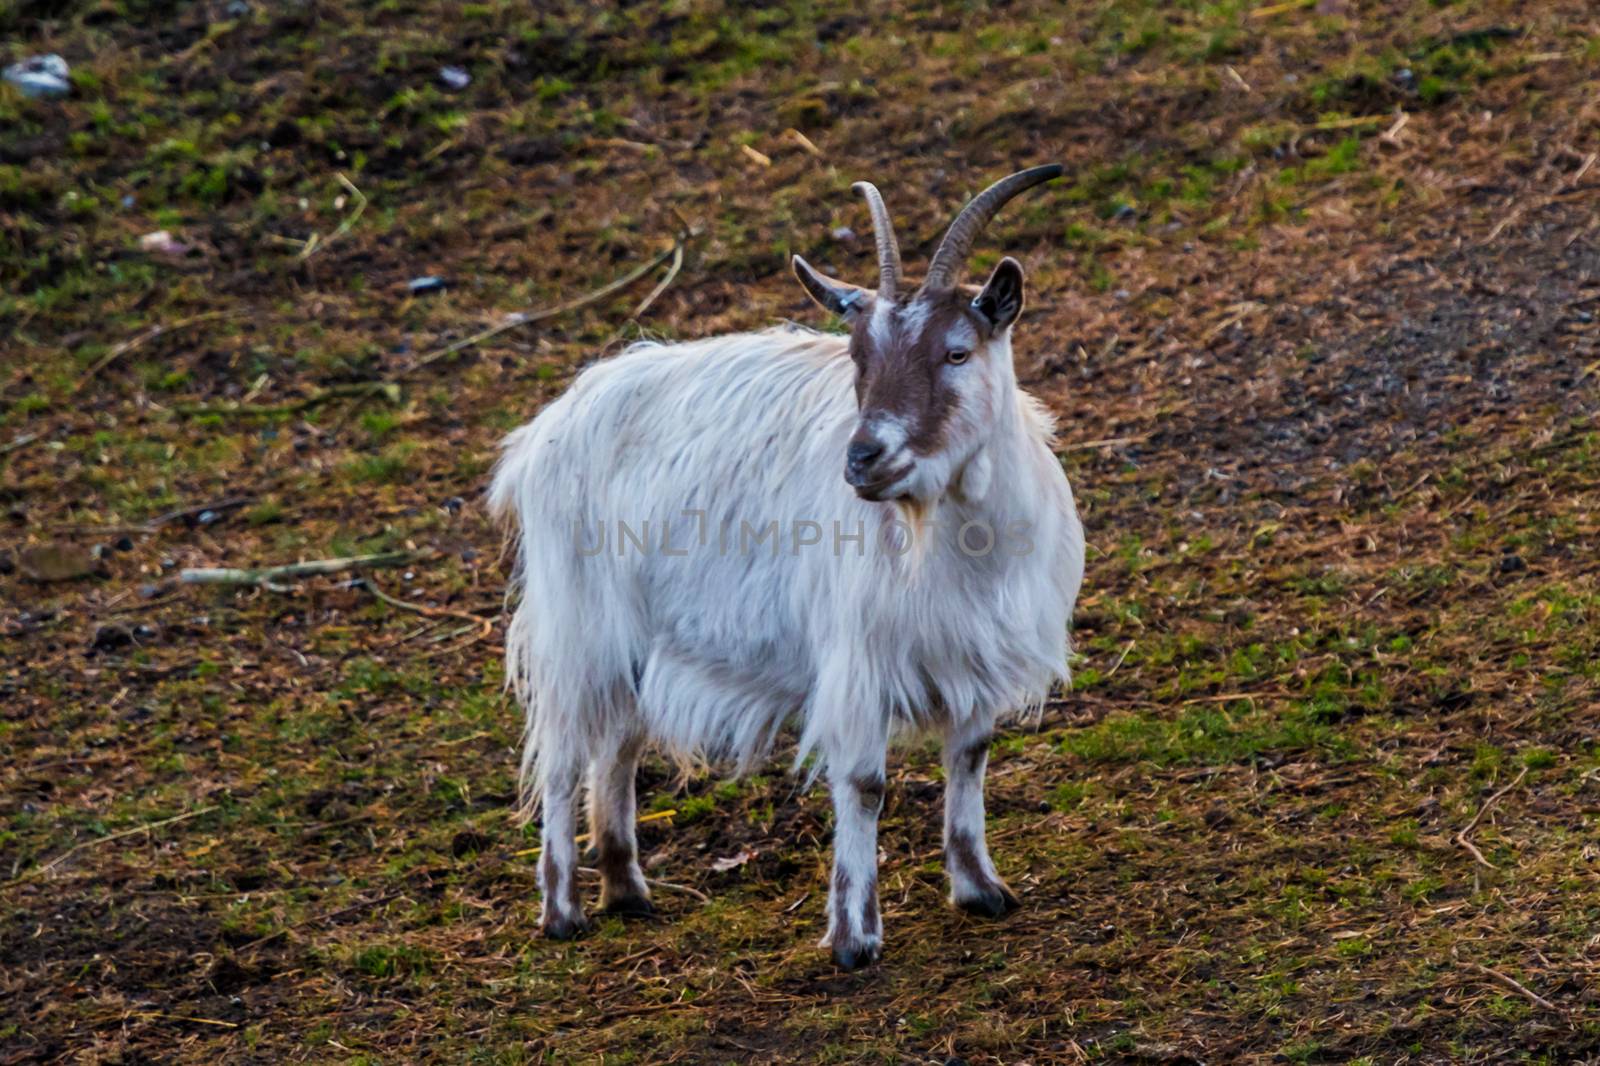 White brown goat with fluffy fur in nature grass